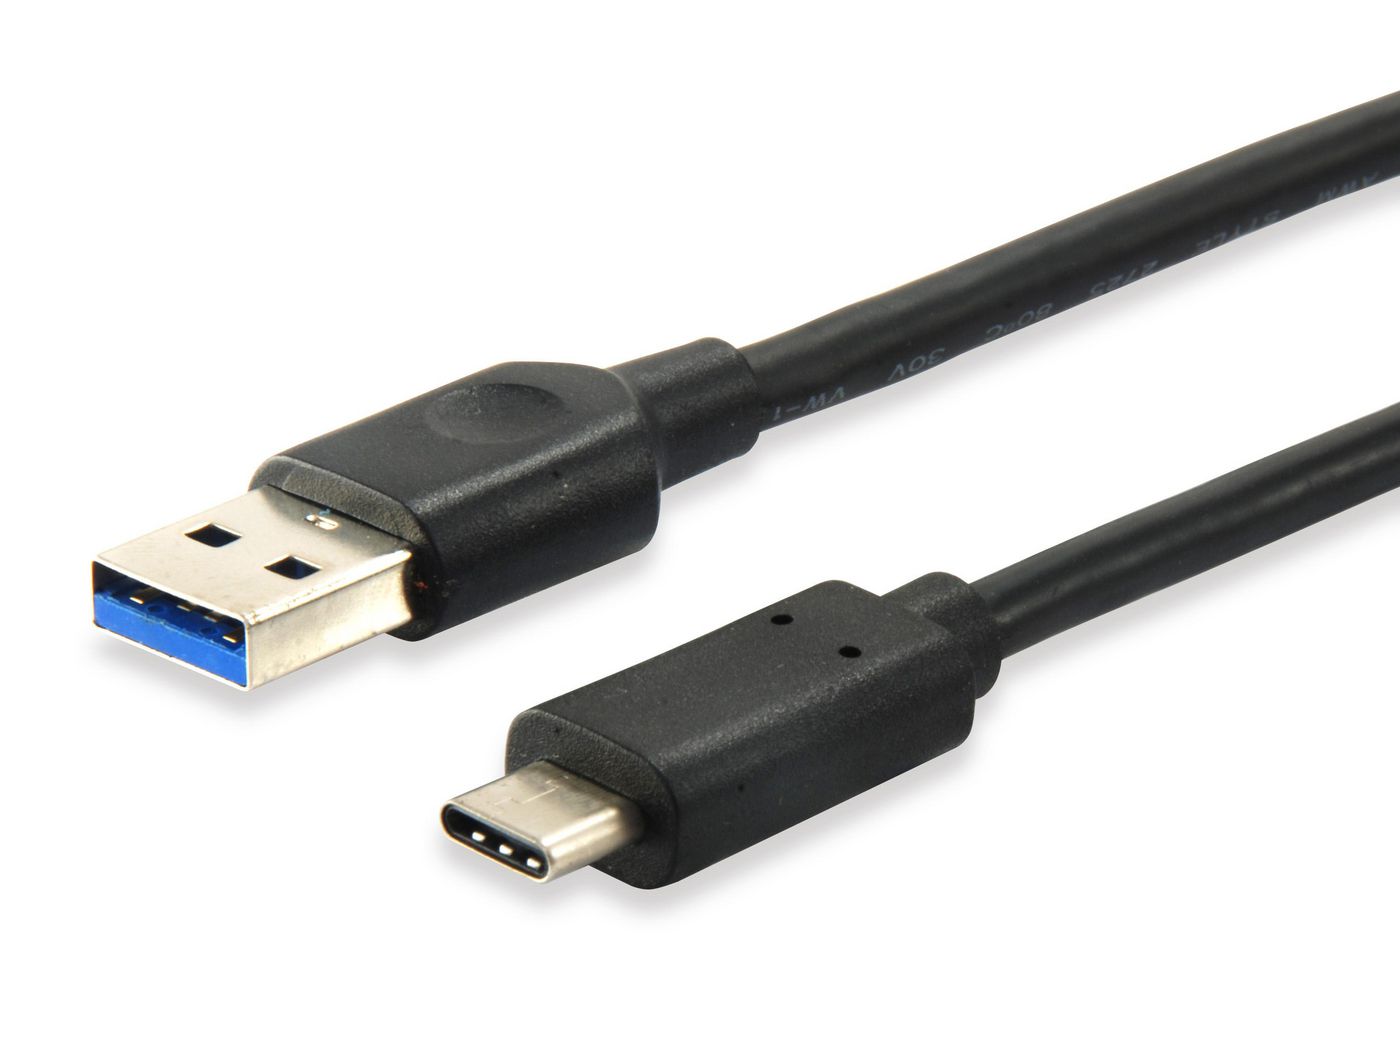 EQUIP 128343 USB 3.0 C Male to A Male Cable 0.25m